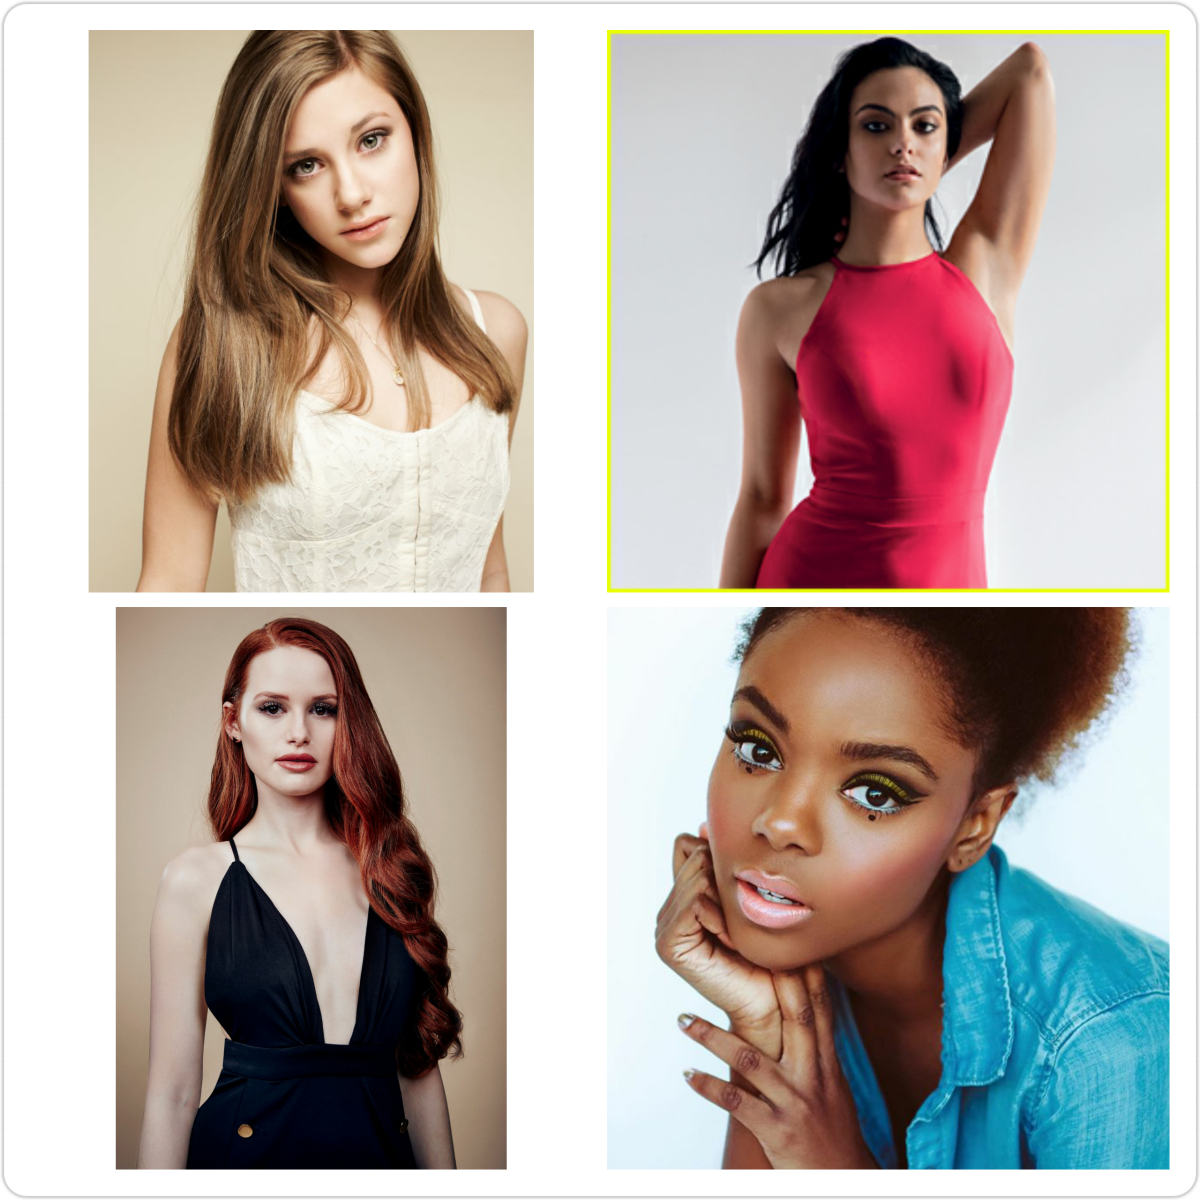 #CelebrityCrush- The Ladies of “Riverdale” Edition (@CW_Riverdale)!